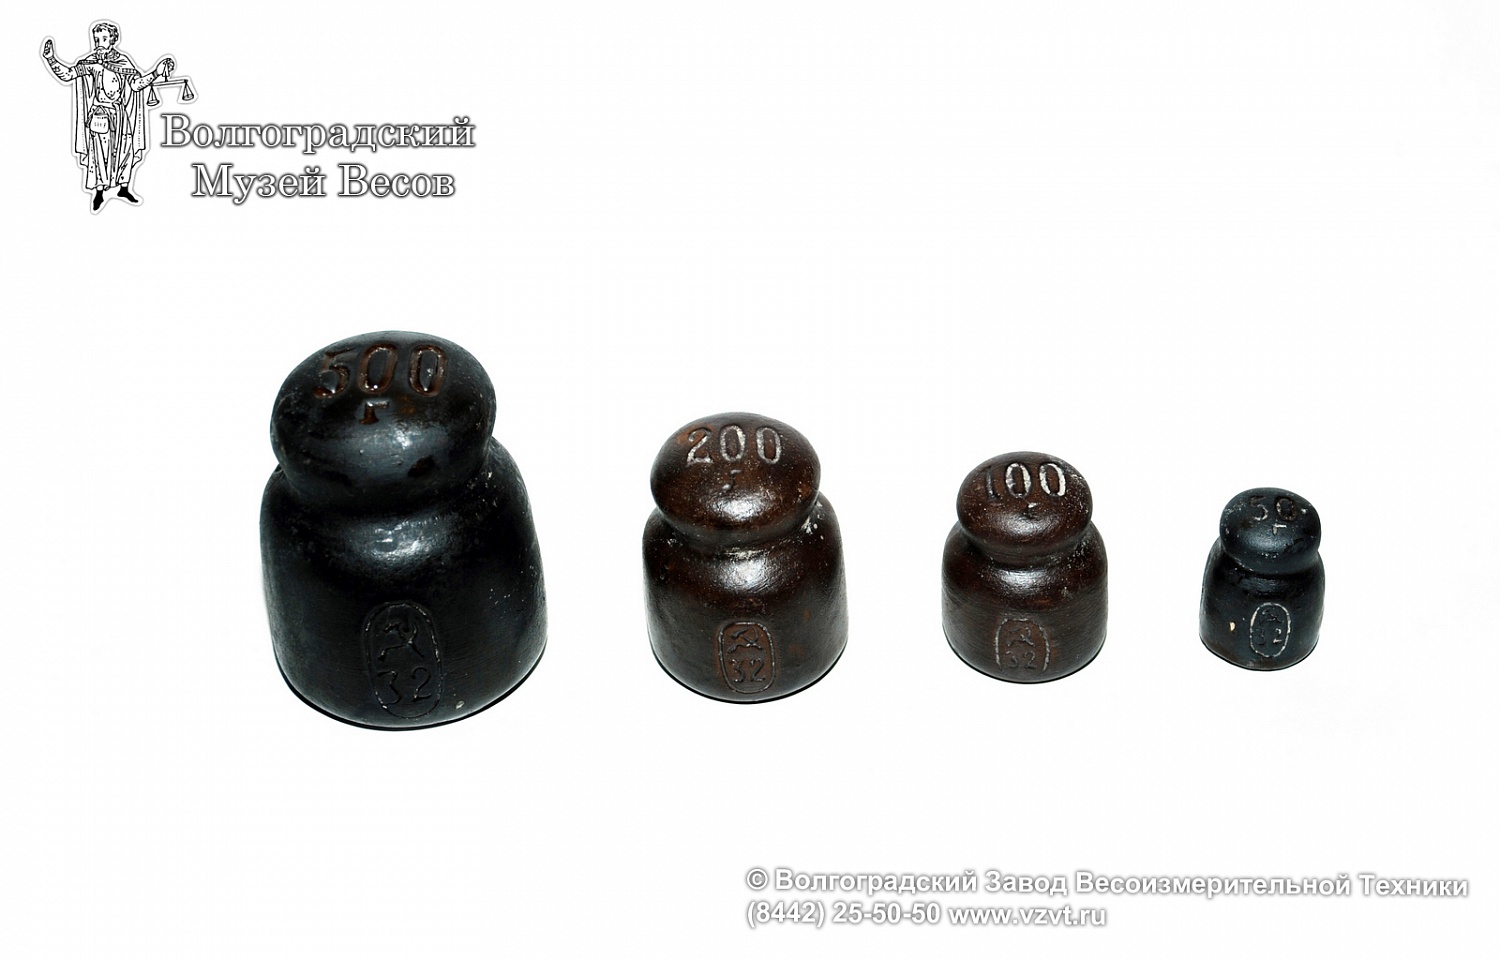 A set of ceramic metric weights with a nominal value of 50g to 500g. the USSR, Komintern, 1932